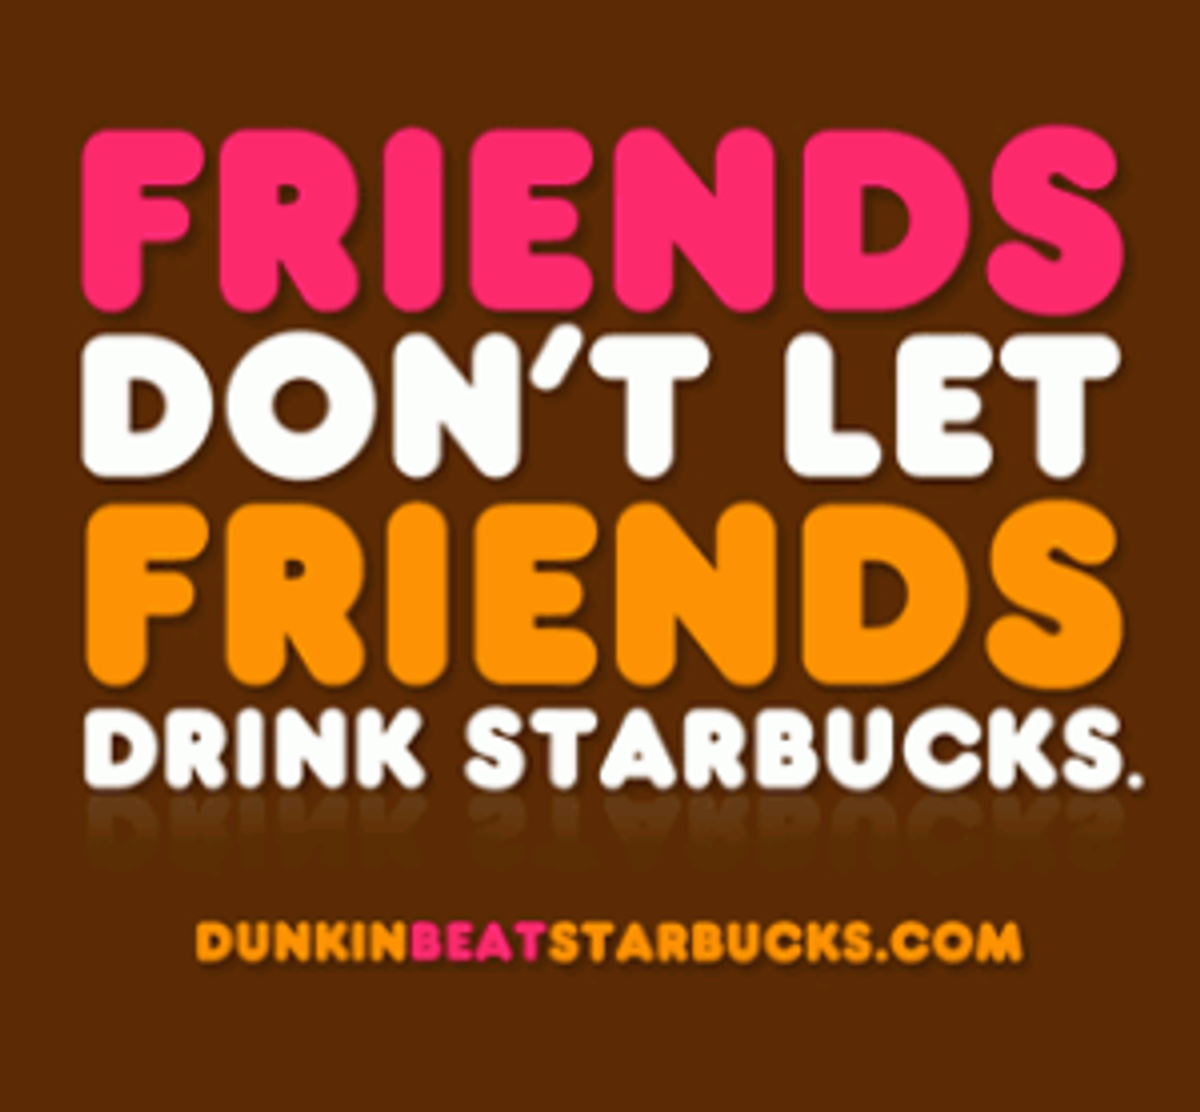 6 Reasons Why Dunkin' Is Better Than Starbucks